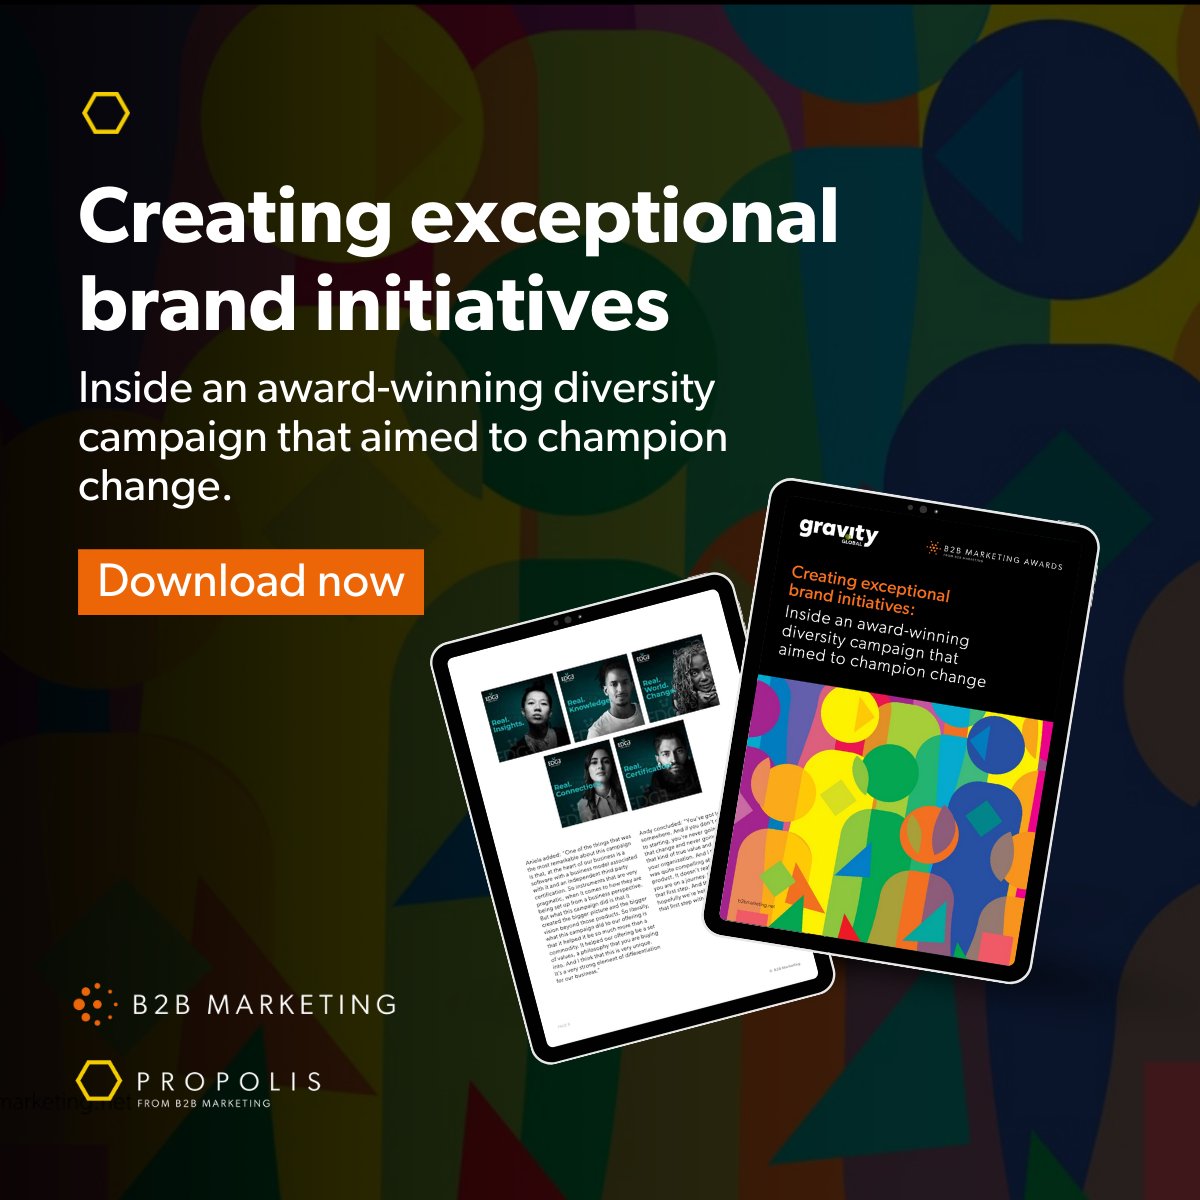 Gravity Global teamed up with EDGE to deliver a go-to-market strategy to build EDGE’s brand fame to drive global awareness around its diversity initiatives. Learn more below: okt.to/5ydT1J #casestudy #b2bmarketing #b2bawards